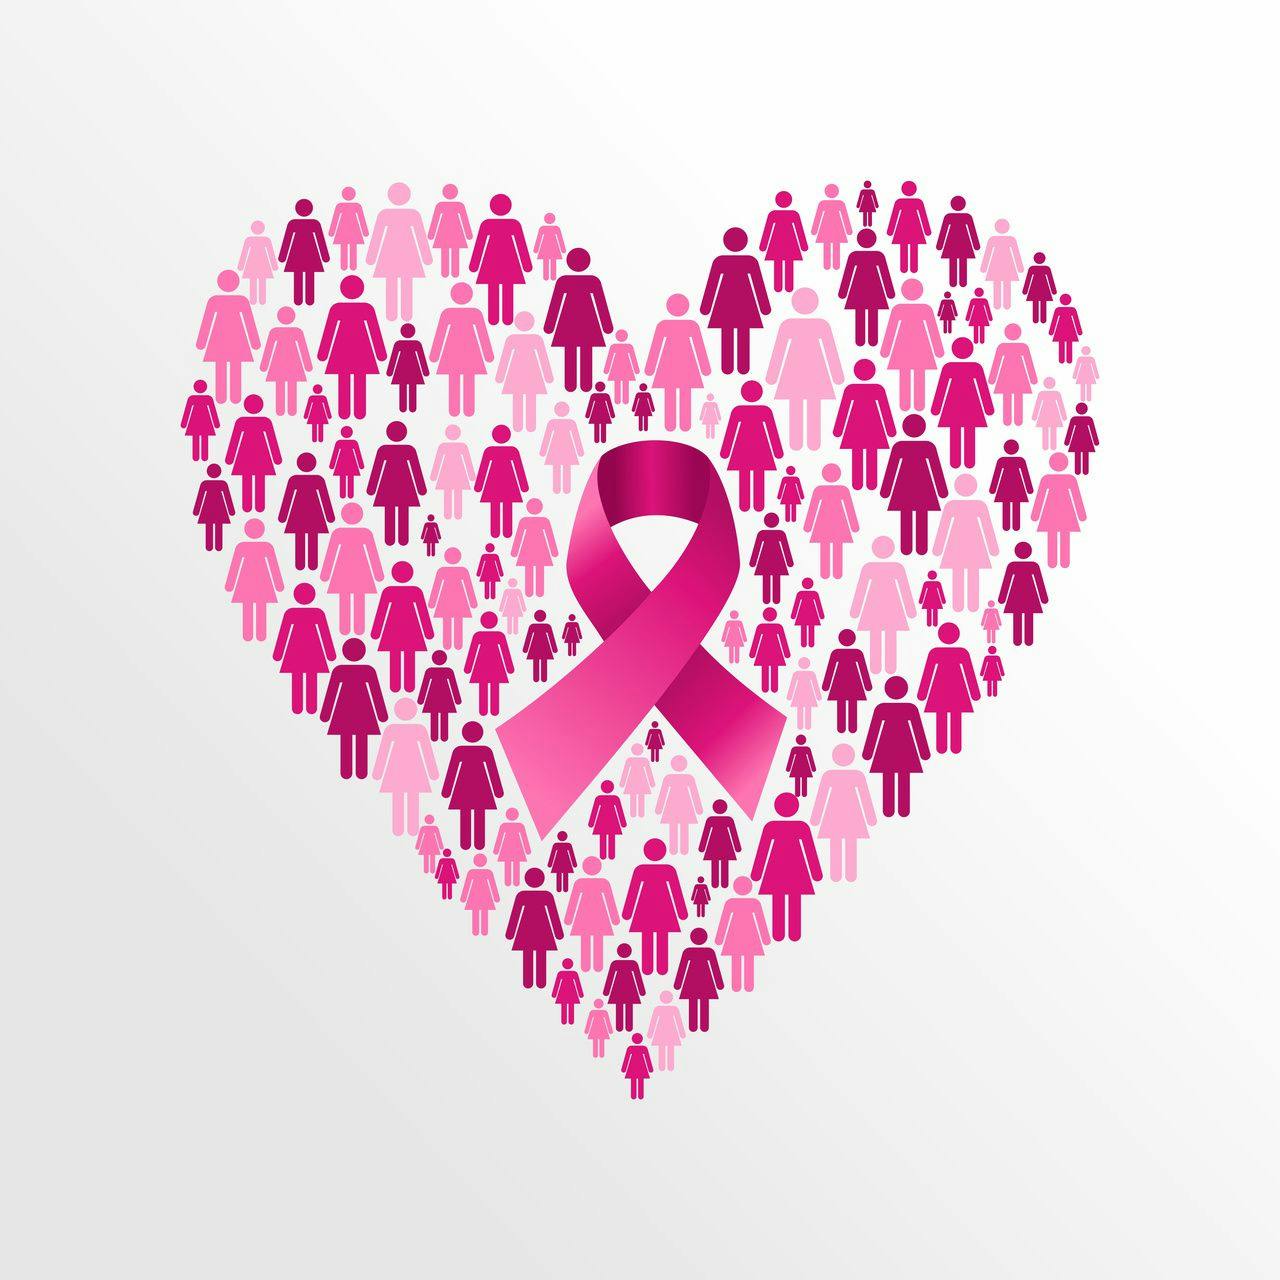 Heart of breast cancer ribbons